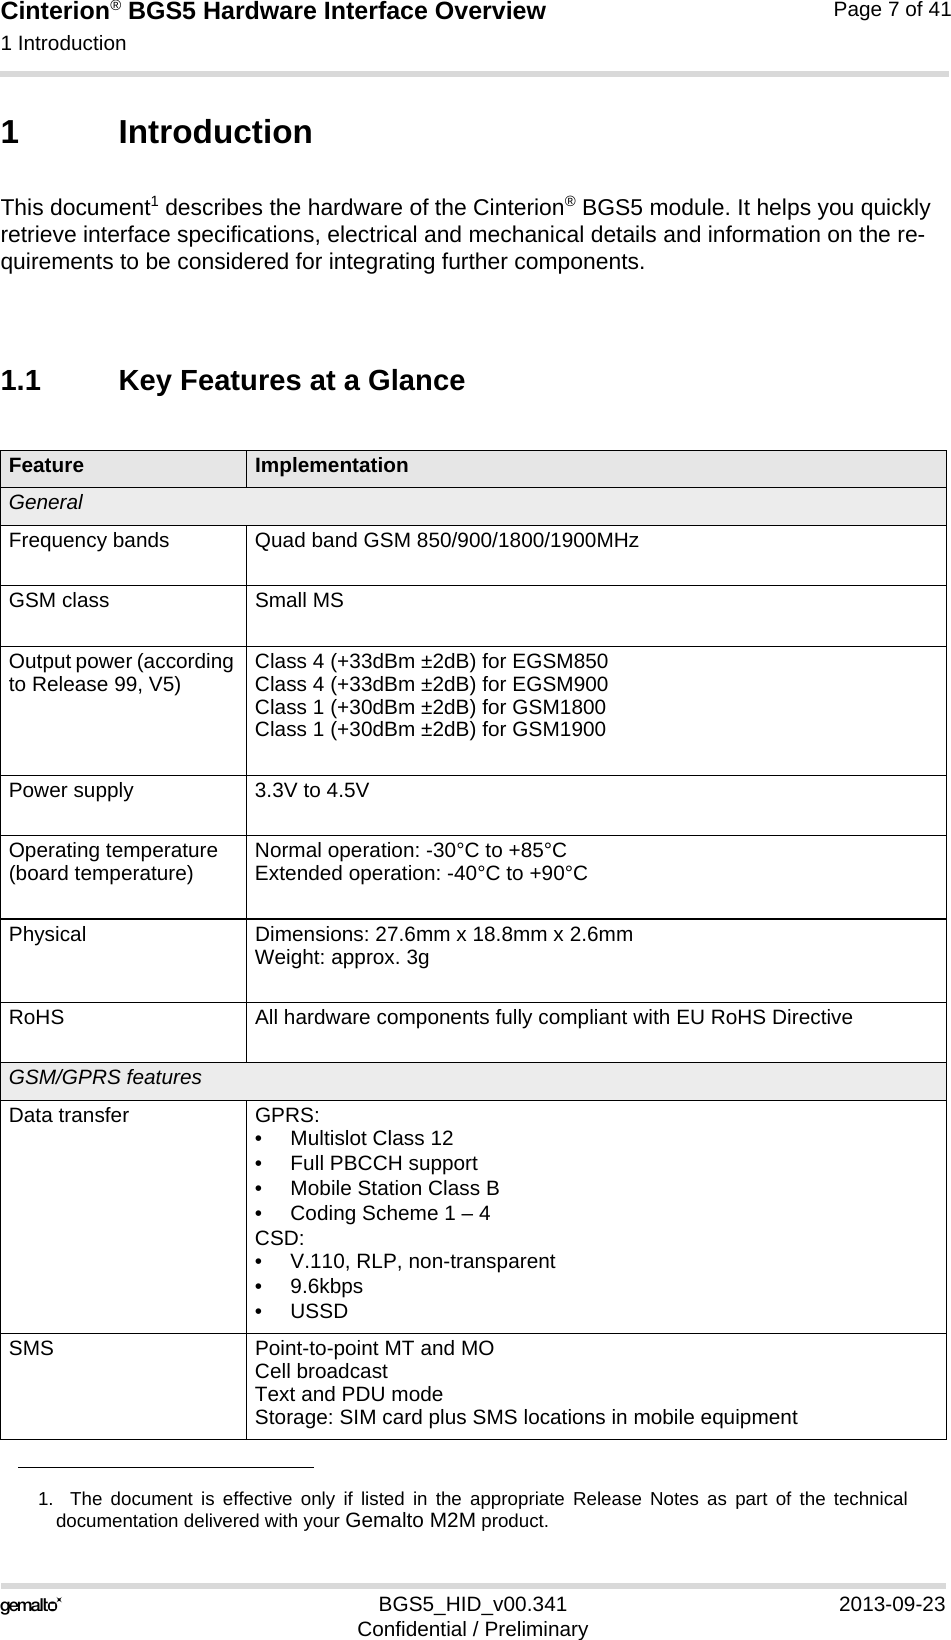 Cinterion® BGS5 Hardware Interface Overview1 Introduction10BGS5_HID_v00.341 2013-09-23Confidential / PreliminaryPage 7 of 411 IntroductionThis document1 describes the hardware of the Cinterion® BGS5 module. It helps you quickly retrieve interface specifications, electrical and mechanical details and information on the re-quirements to be considered for integrating further components.1.1 Key Features at a Glance1.  The document is effective only if listed in the appropriate Release Notes as part of the technicaldocumentation delivered with your Gemalto M2M product.Feature ImplementationGeneralFrequency bands Quad band GSM 850/900/1800/1900MHzGSM class Small MSOutput power (according to Release 99, V5) Class 4 (+33dBm ±2dB) for EGSM850Class 4 (+33dBm ±2dB) for EGSM900Class 1 (+30dBm ±2dB) for GSM1800Class 1 (+30dBm ±2dB) for GSM1900Power supply 3.3V to 4.5VOperating temperature (board temperature) Normal operation: -30°C to +85°CExtended operation: -40°C to +90°CPhysical Dimensions: 27.6mm x 18.8mm x 2.6mmWeight: approx. 3gRoHS All hardware components fully compliant with EU RoHS DirectiveGSM/GPRS featuresData transfer GPRS:• Multislot Class 12• Full PBCCH support• Mobile Station Class B• Coding Scheme 1 – 4CSD:• V.110, RLP, non-transparent•9.6kbps•USSDSMS Point-to-point MT and MOCell broadcastText and PDU modeStorage: SIM card plus SMS locations in mobile equipment